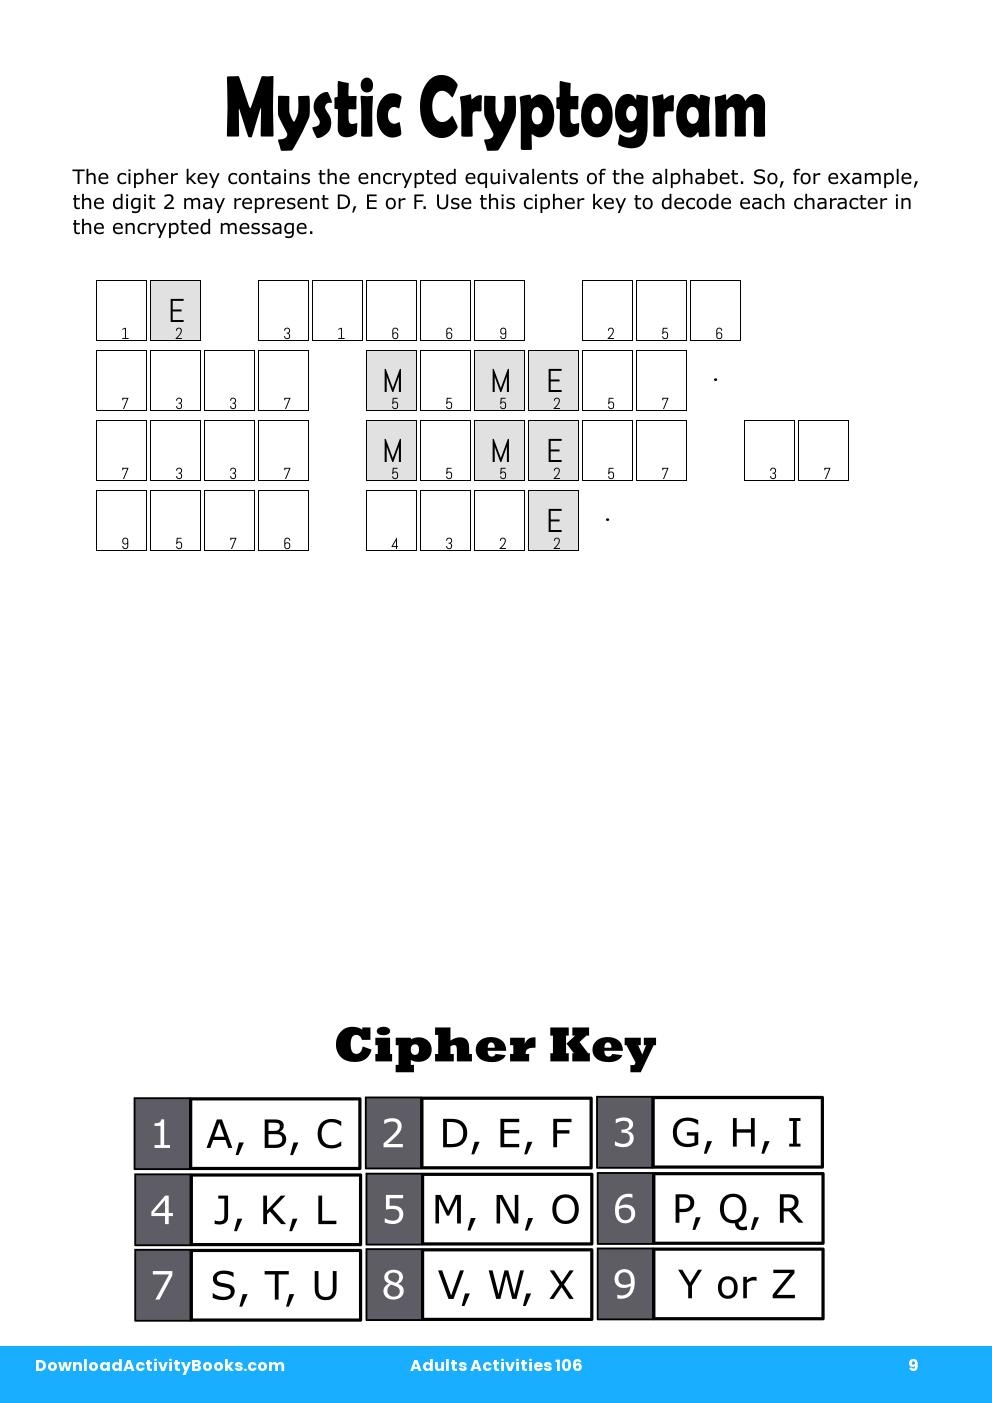 Mystic Cryptogram in Adults Activities 106